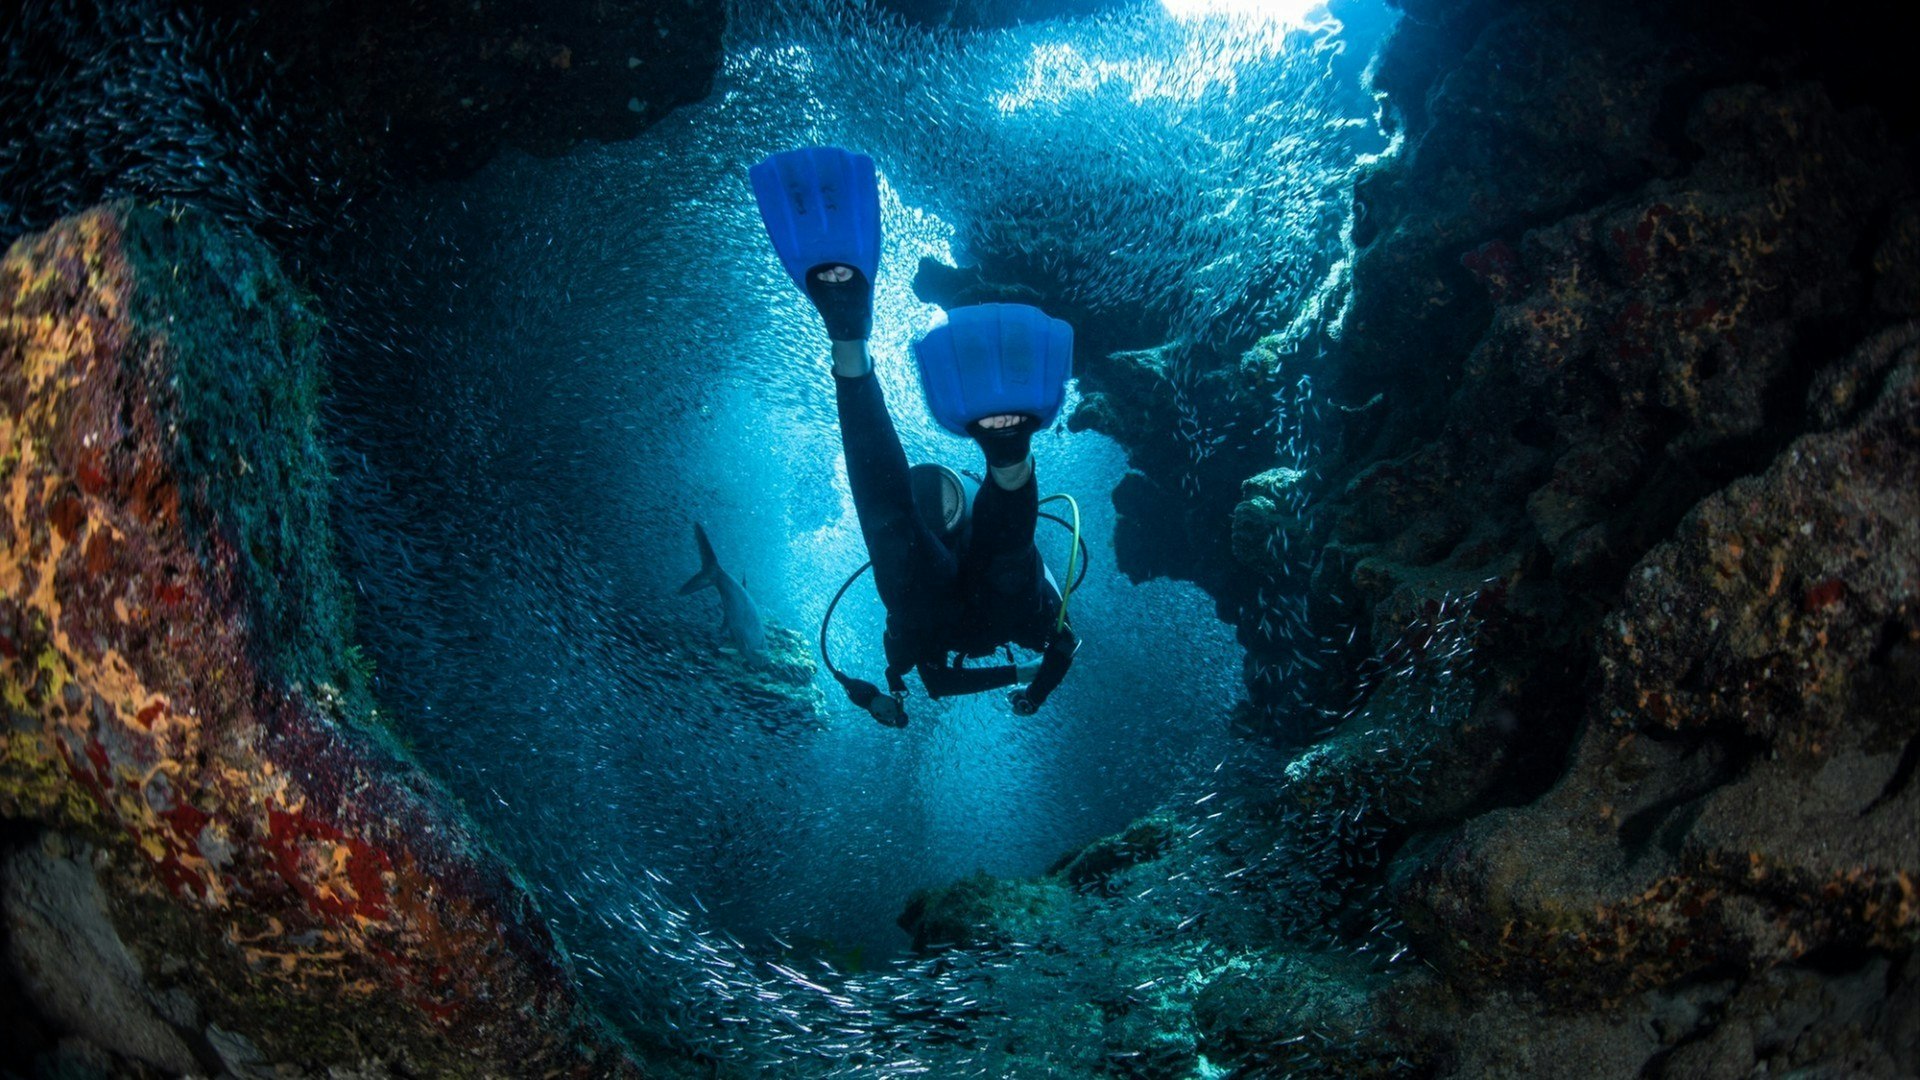 A diver explores the cracks, crevices and holes in a coral reef on the island of Grand Cayman